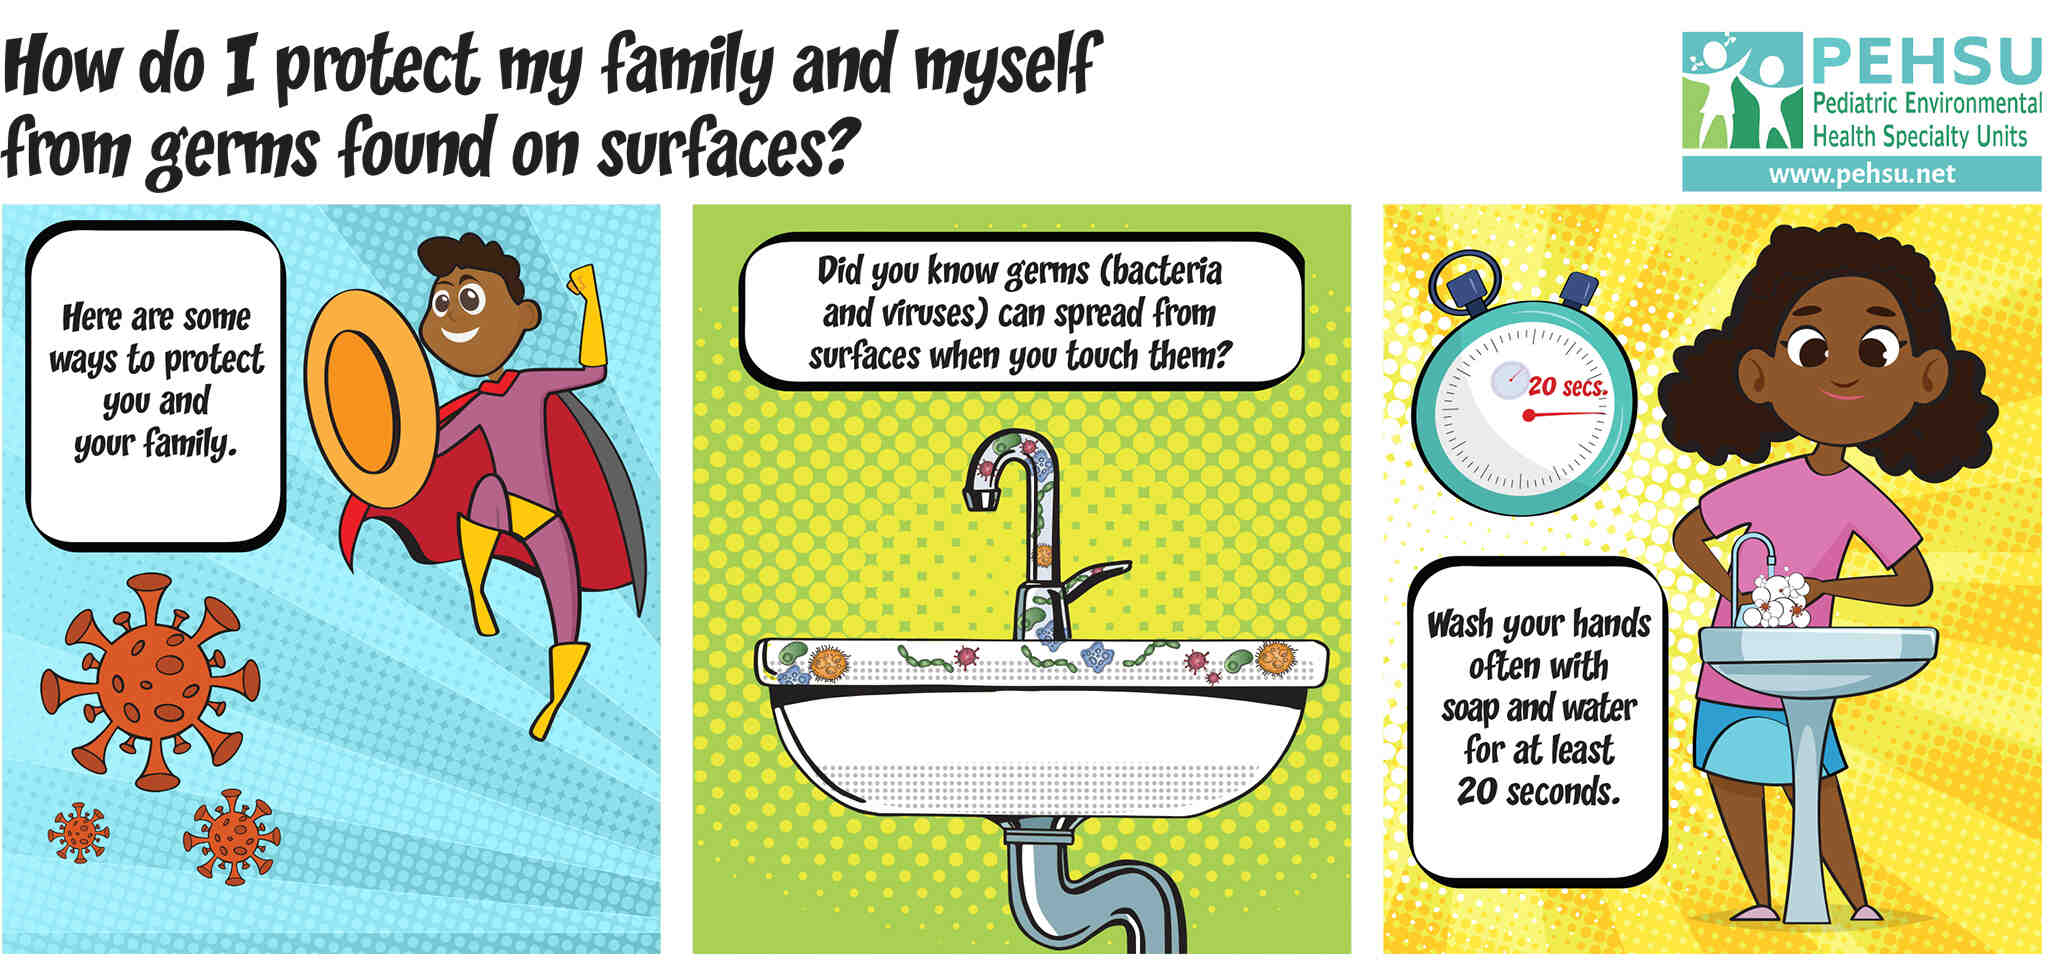 Three panels of a comic strip with text at top: "How do I protect my family and myself from germs found on surfaces?" First panel shows a child superhero with text "Here are some ways to protect you and your family." Second panel shows a sink with germs with text: "Did you know germs (bacteria and viruses) can spread from surfaces when you touch them?" Third panel shows a child washing hands at a sink with a timer for 20 seconds. Text: "Wash your hands often with soap and water for at least 20 seconds." 